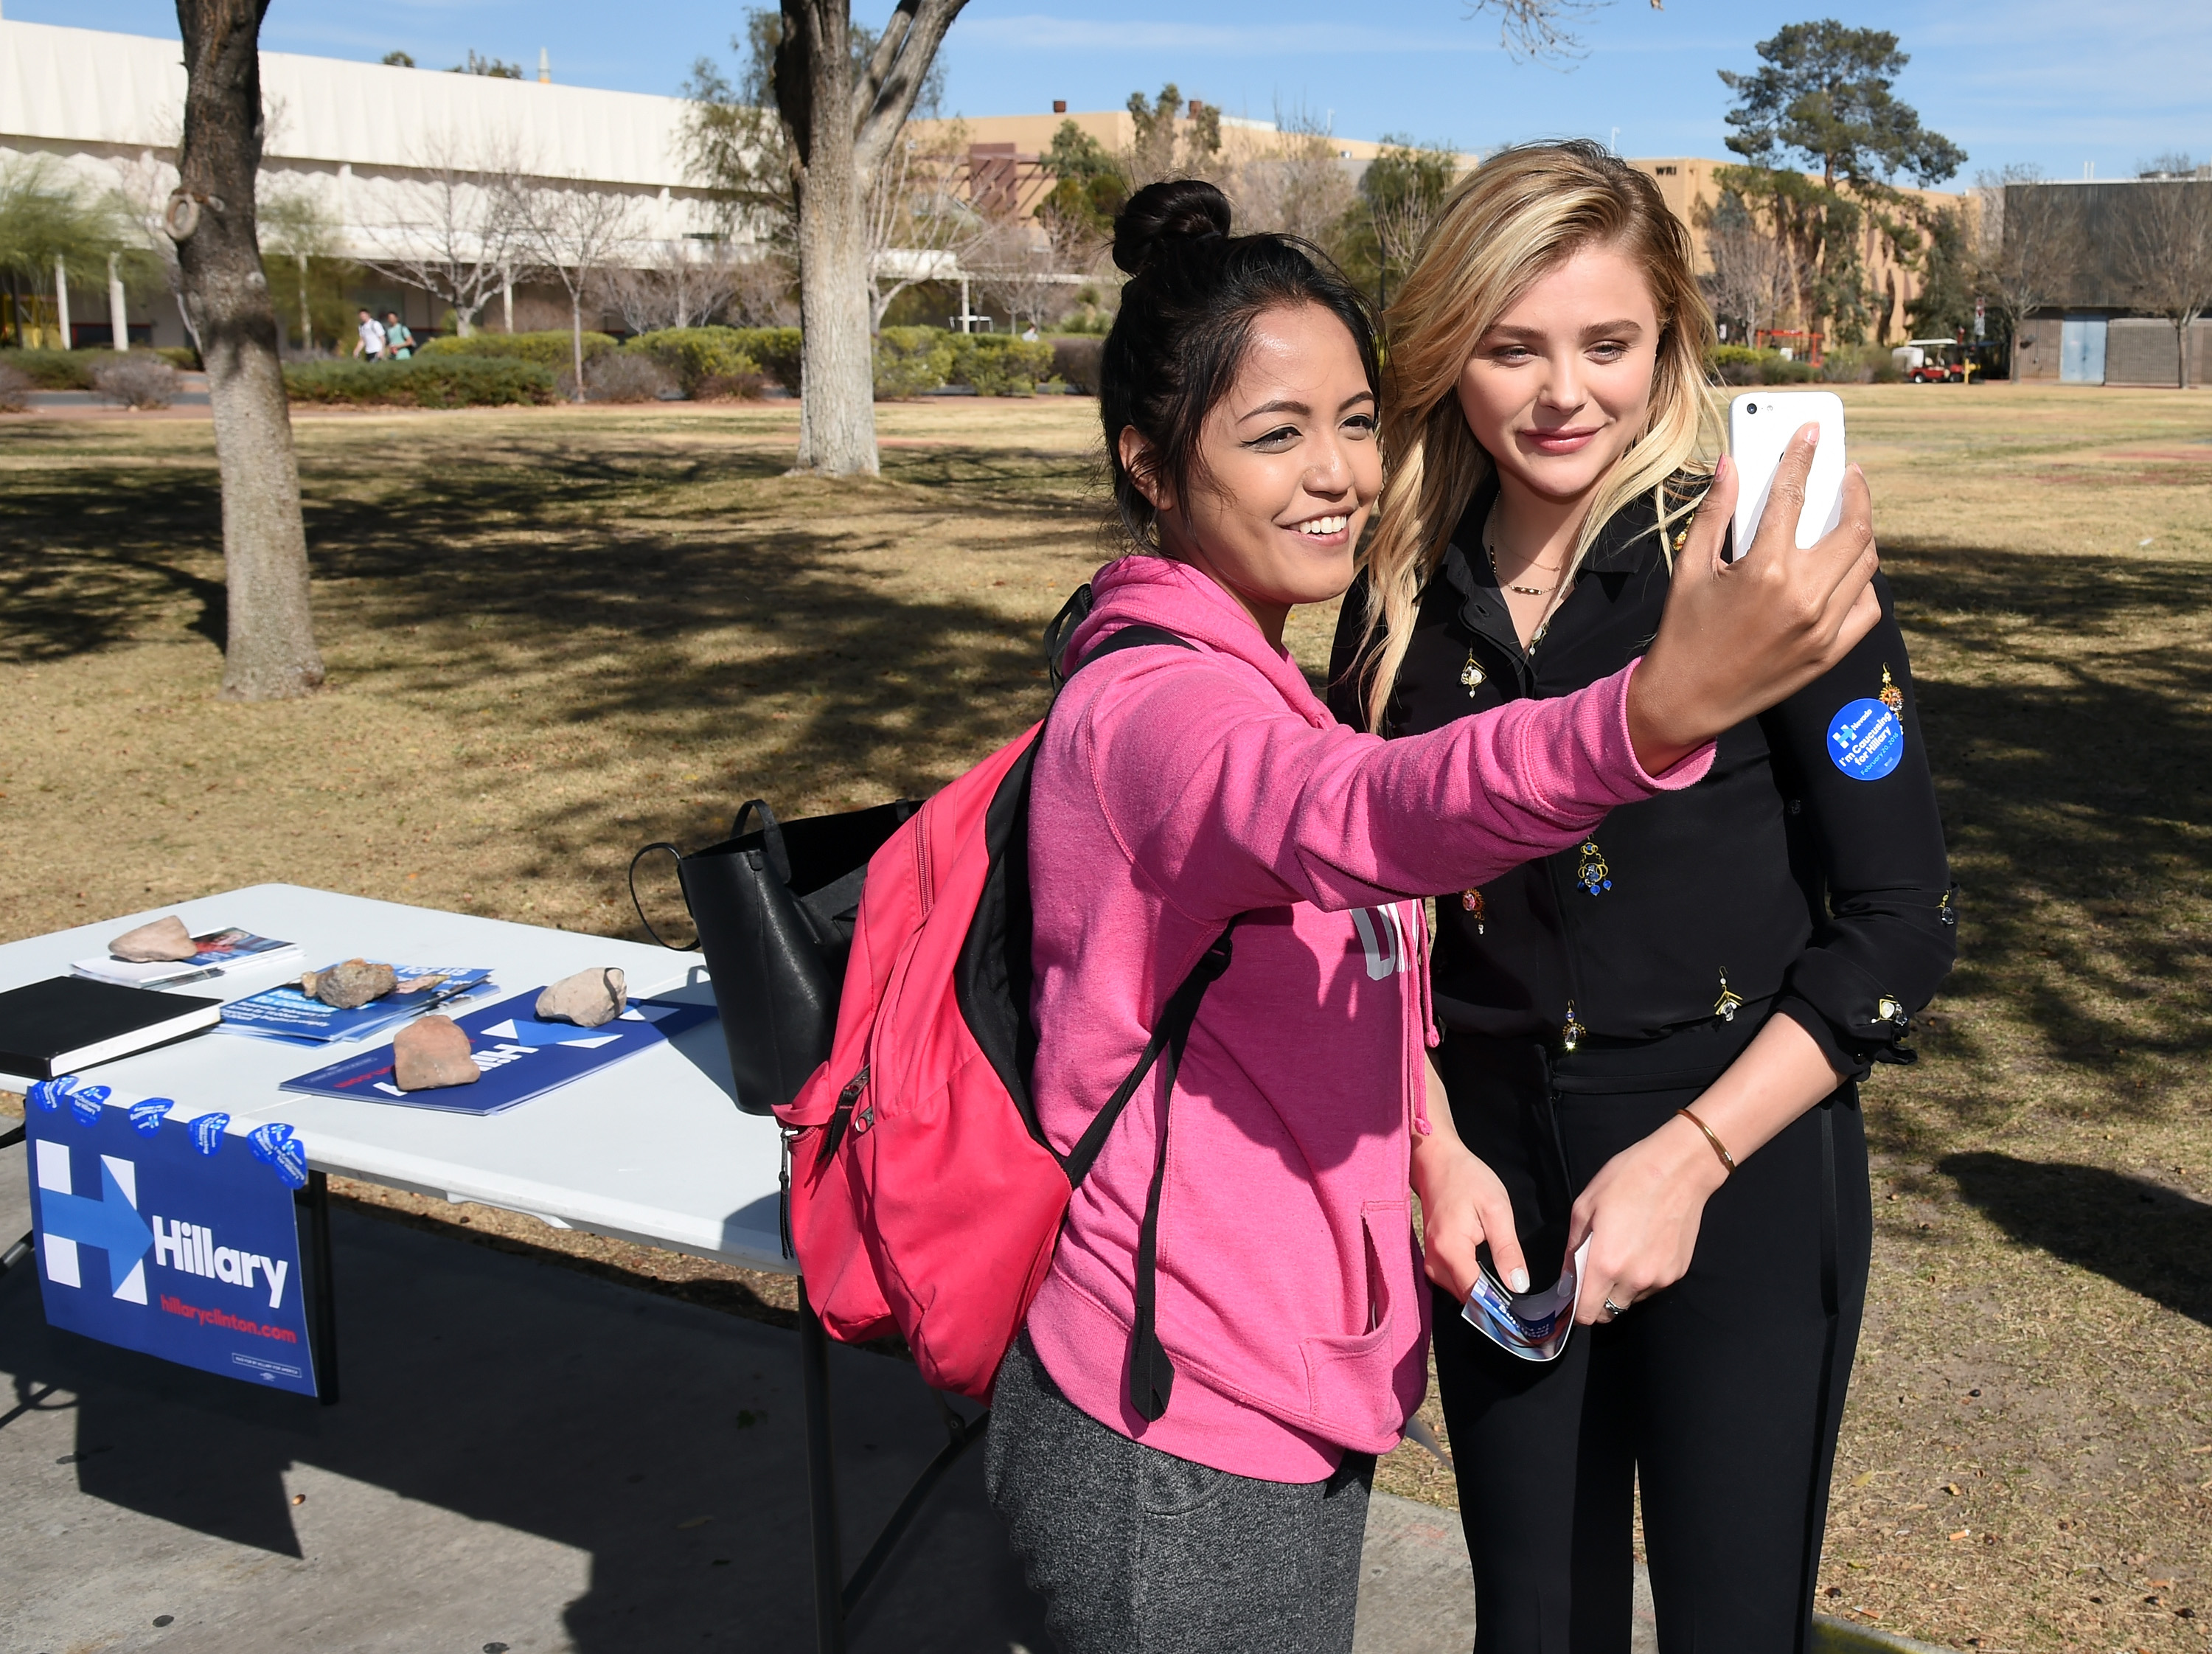 A young voter takes a selfie with actress Chloe Grace Moretz as she campaigns at UNLV for Hillary Clinton